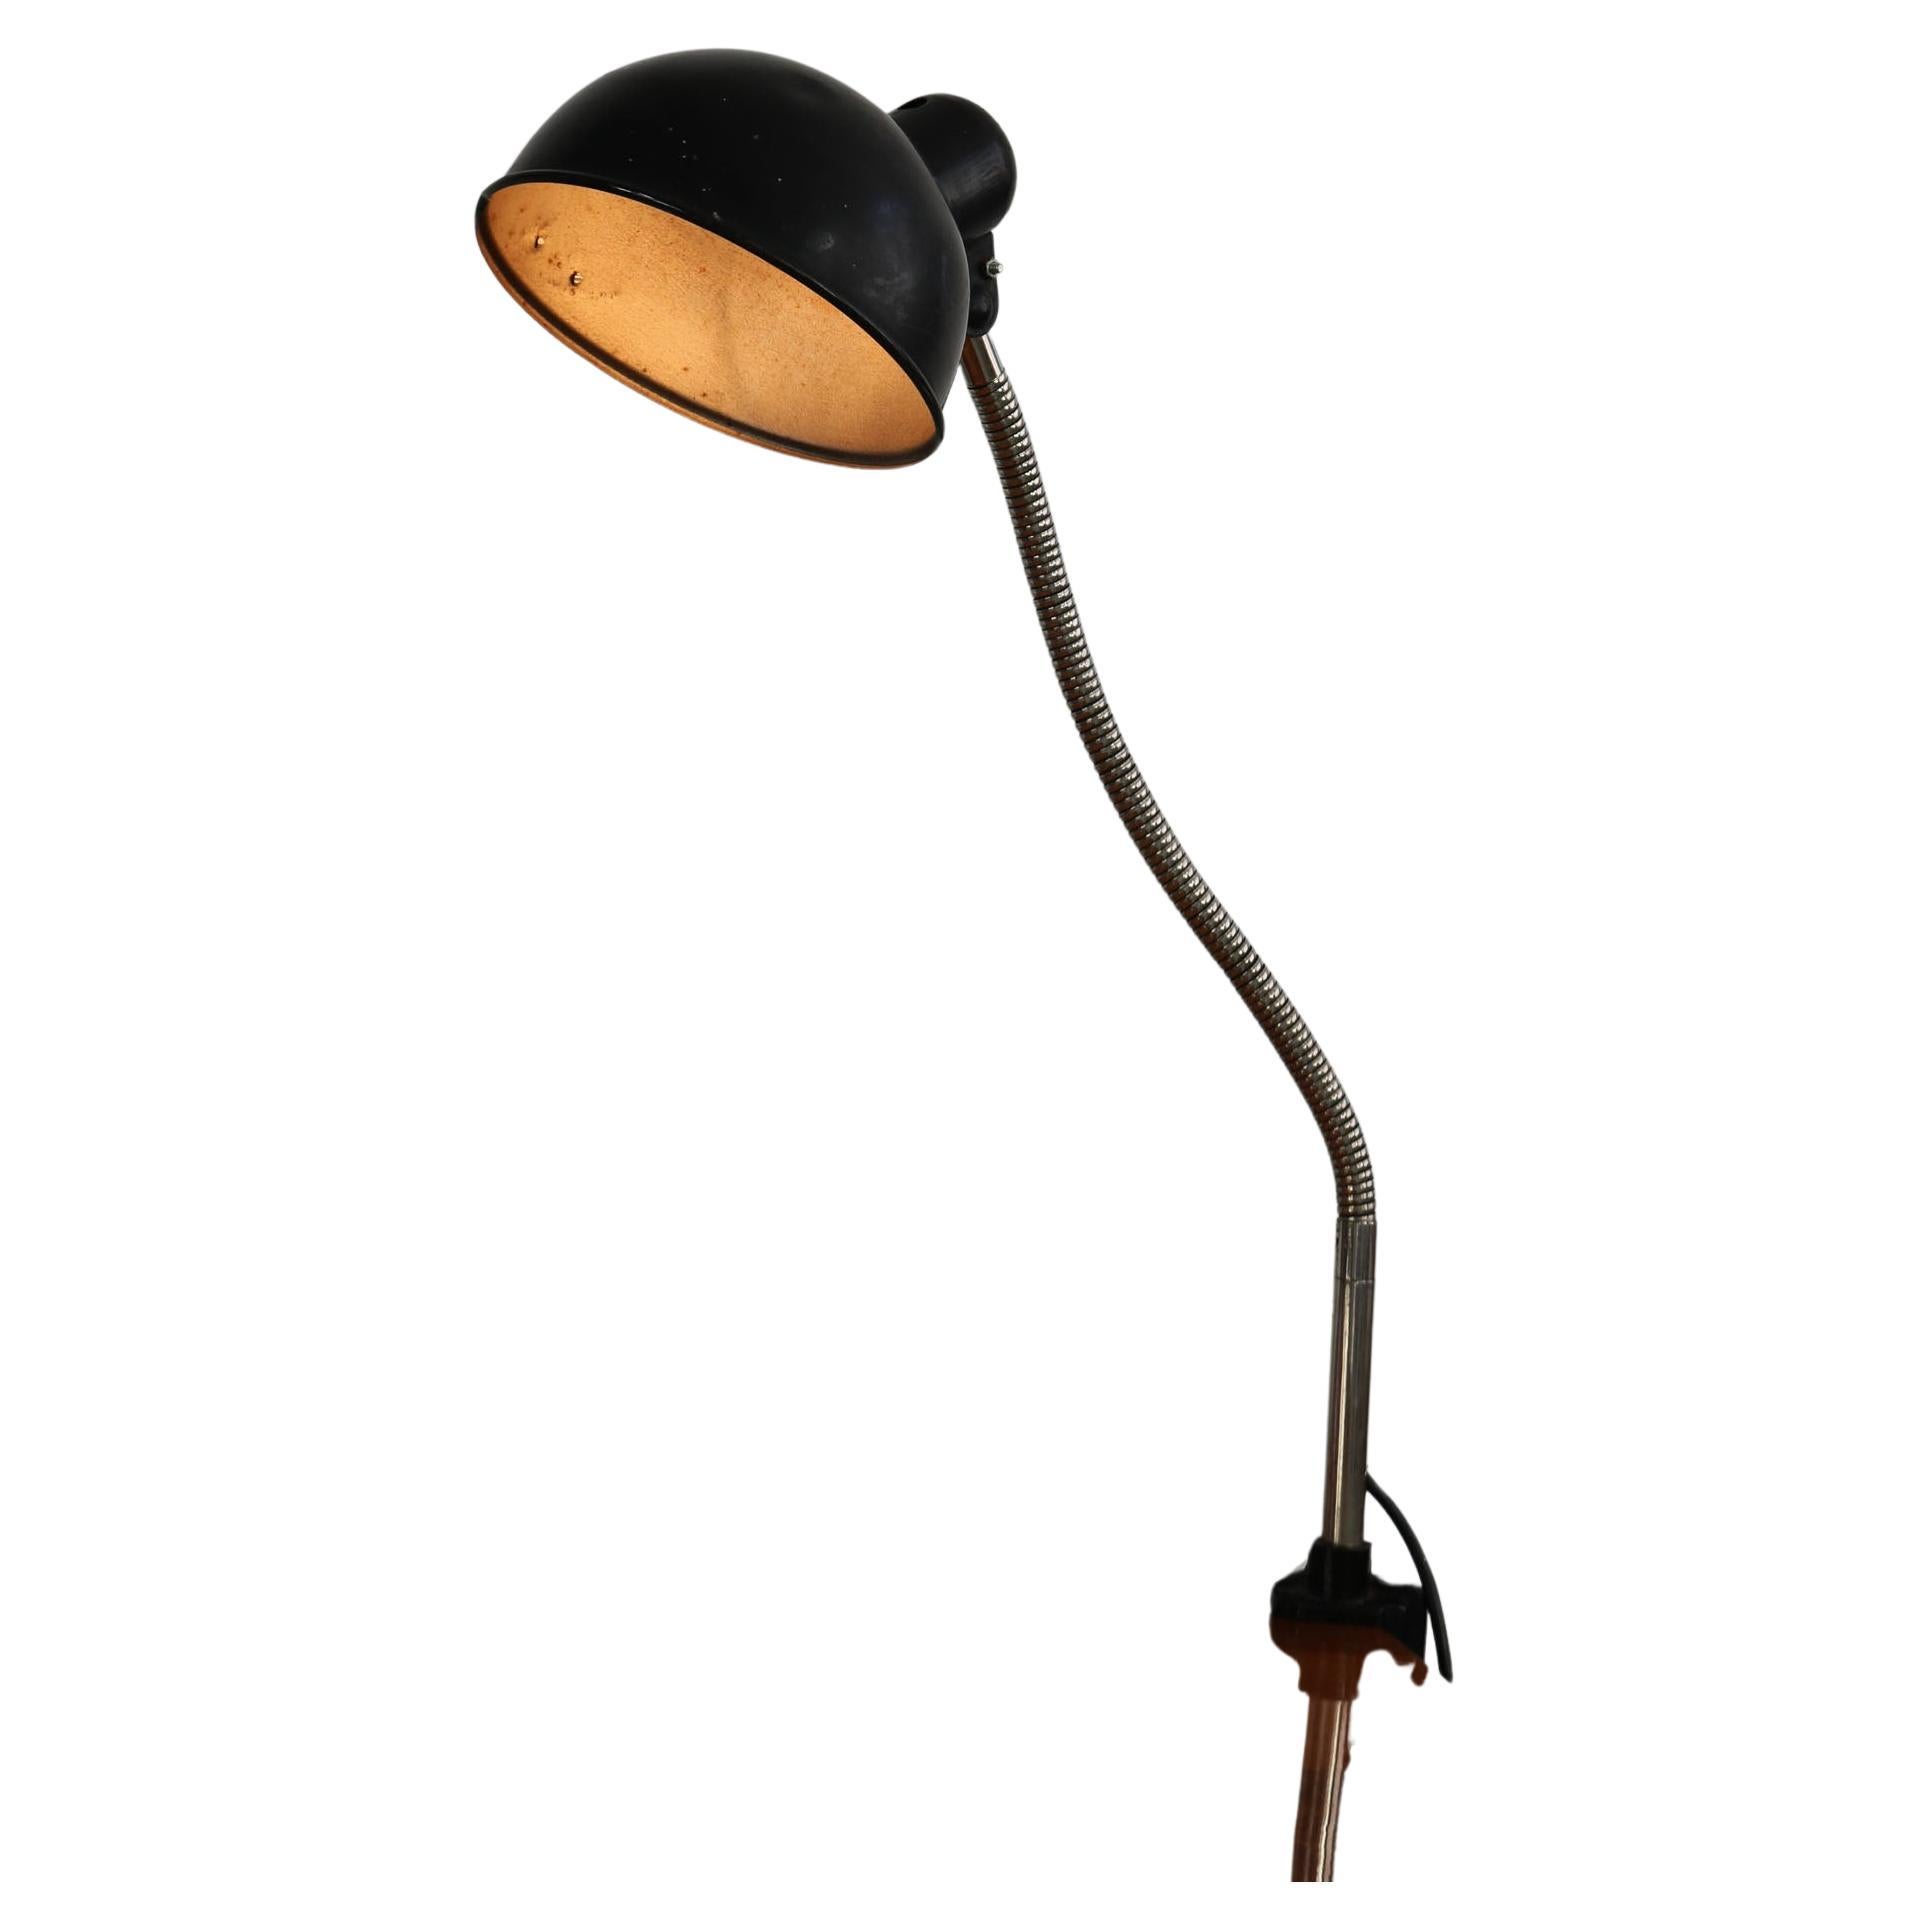 Bauhaus lamp by Christian Dell, Kaiser Idell, Germany 1930s